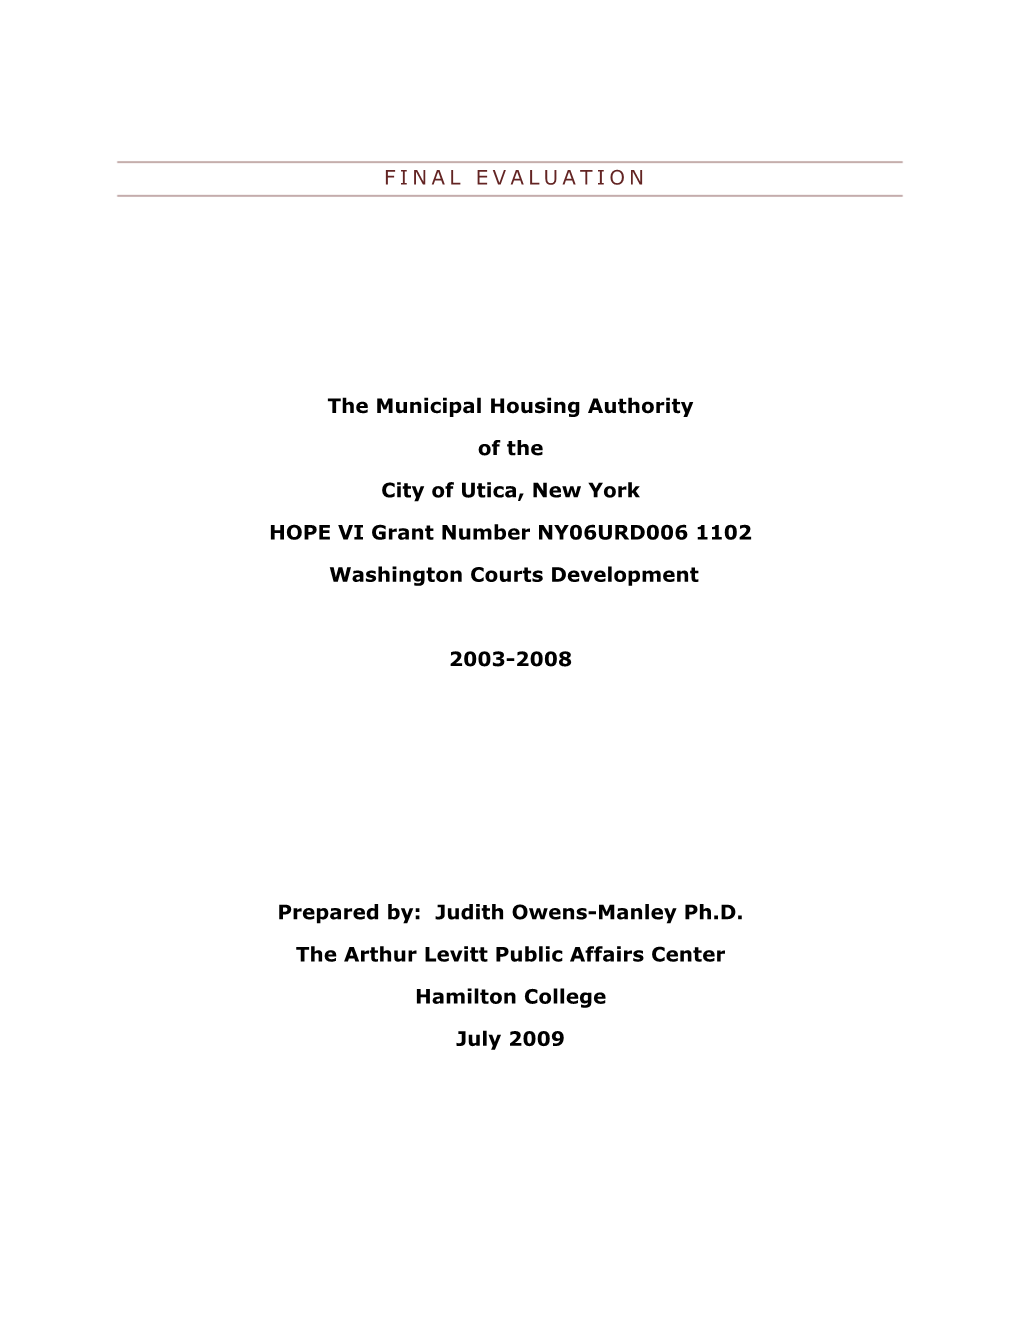 FINAL EVALUATION the Municipal Housing Authority of the City Of